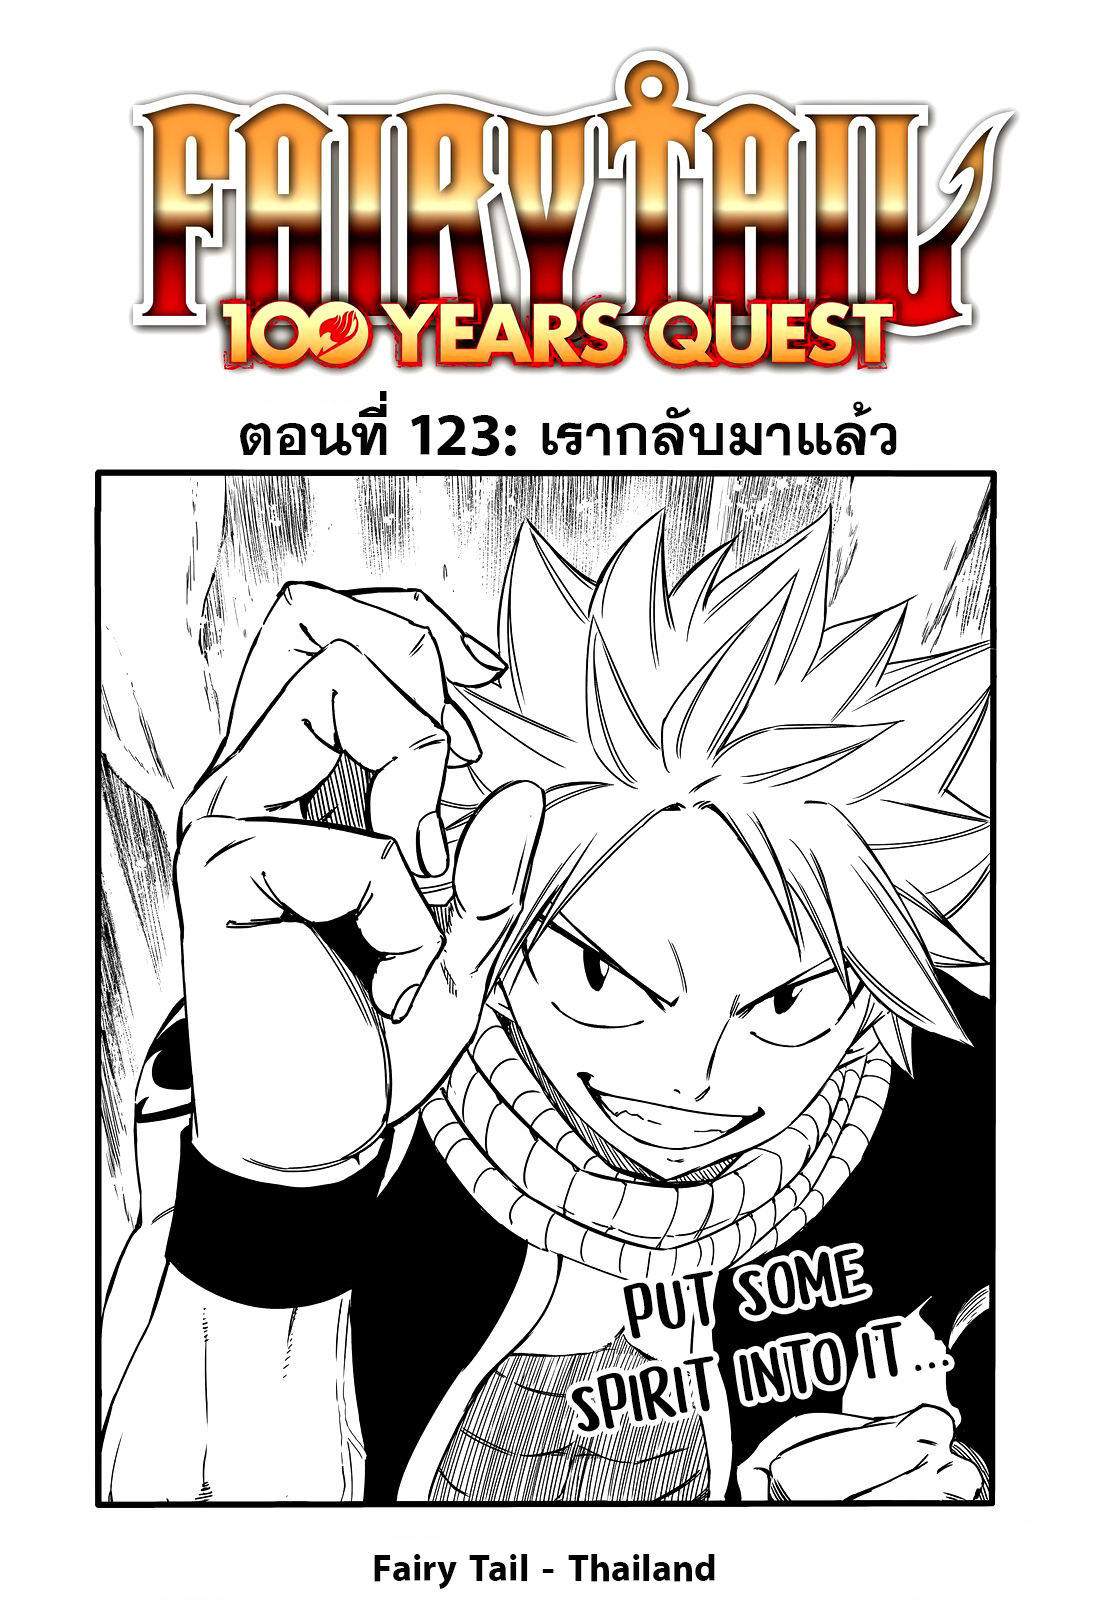 Fairy Tail 100 Years Quest 123 (1)